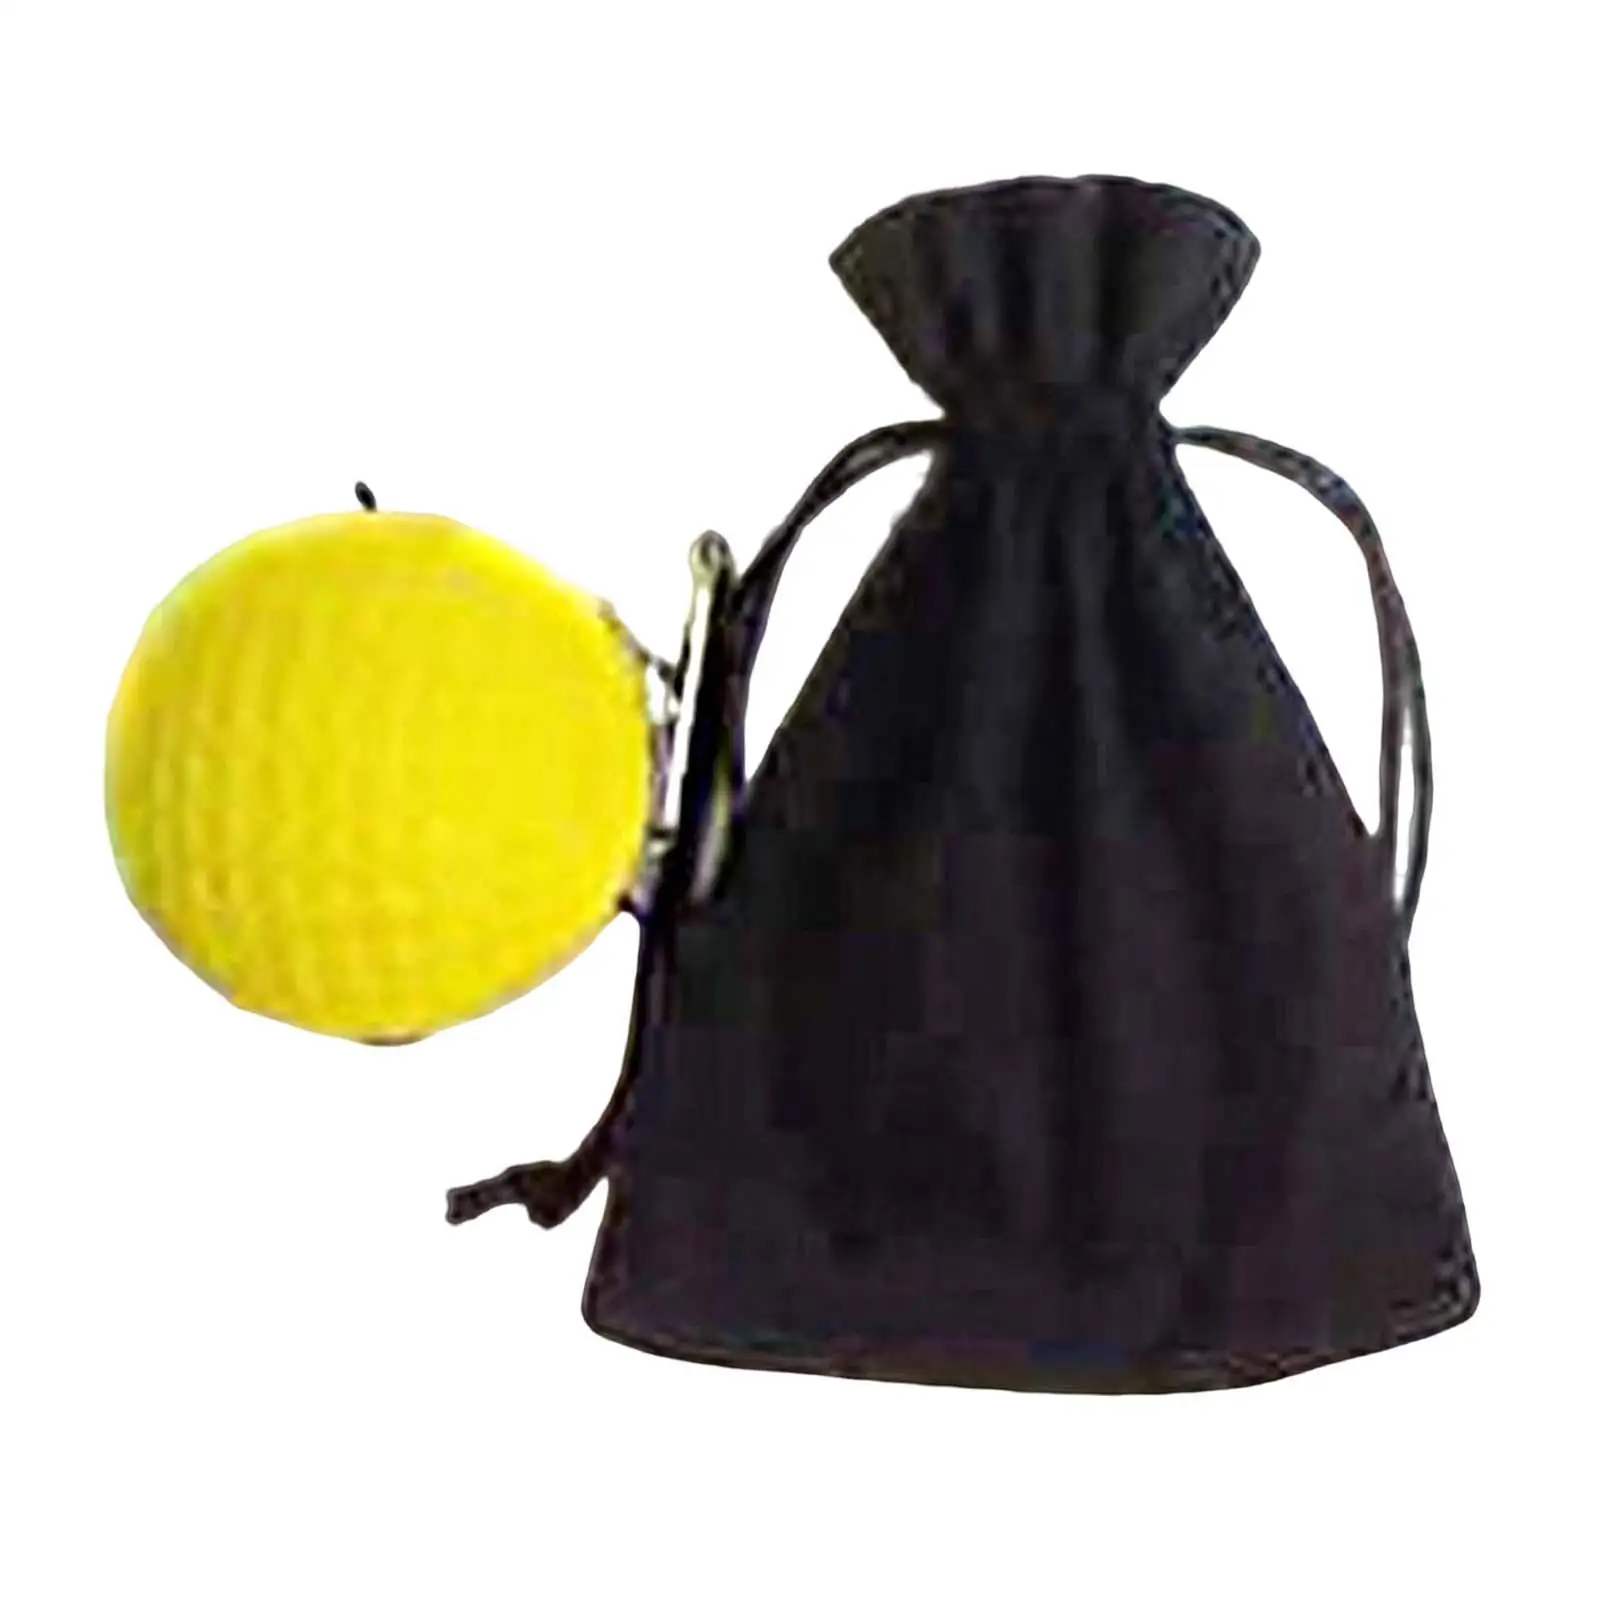 Golf heads balance Rotation Guide Steadhead Reusable for All Levels Golfers Fittings Device Practicing golf head trainer still